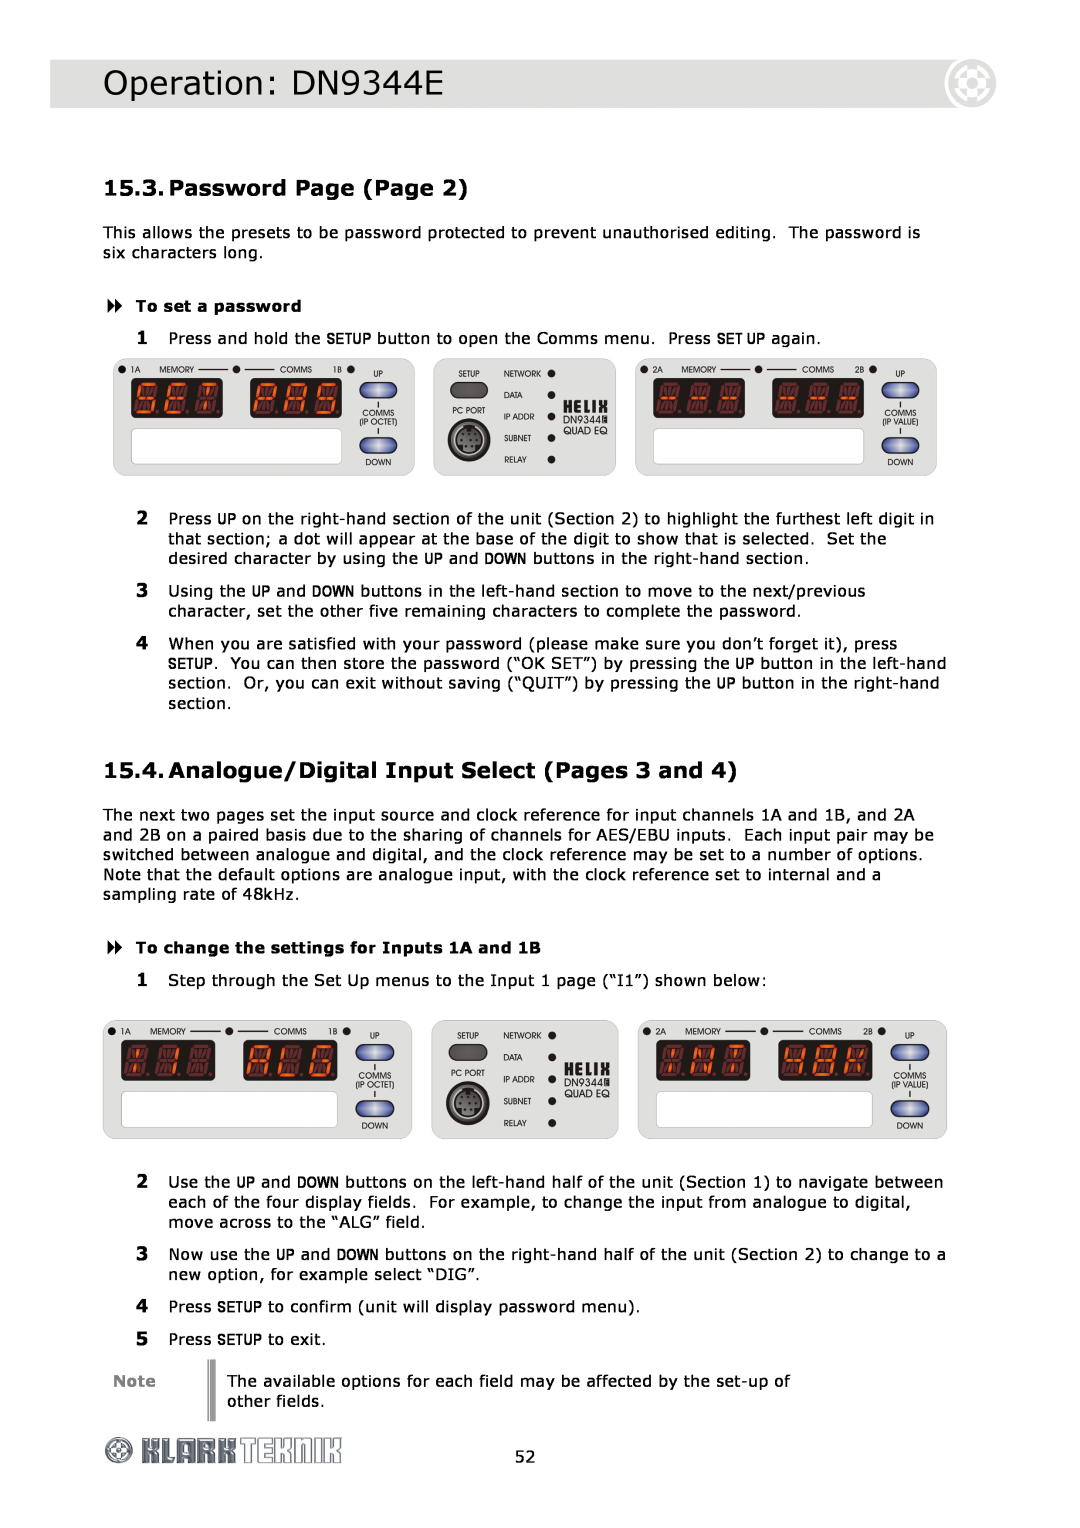 Klark Teknik DN9340E Password Page Page, Analogue/Digital Input Select Pages 3 and, Operation DN9344E, To set a password 